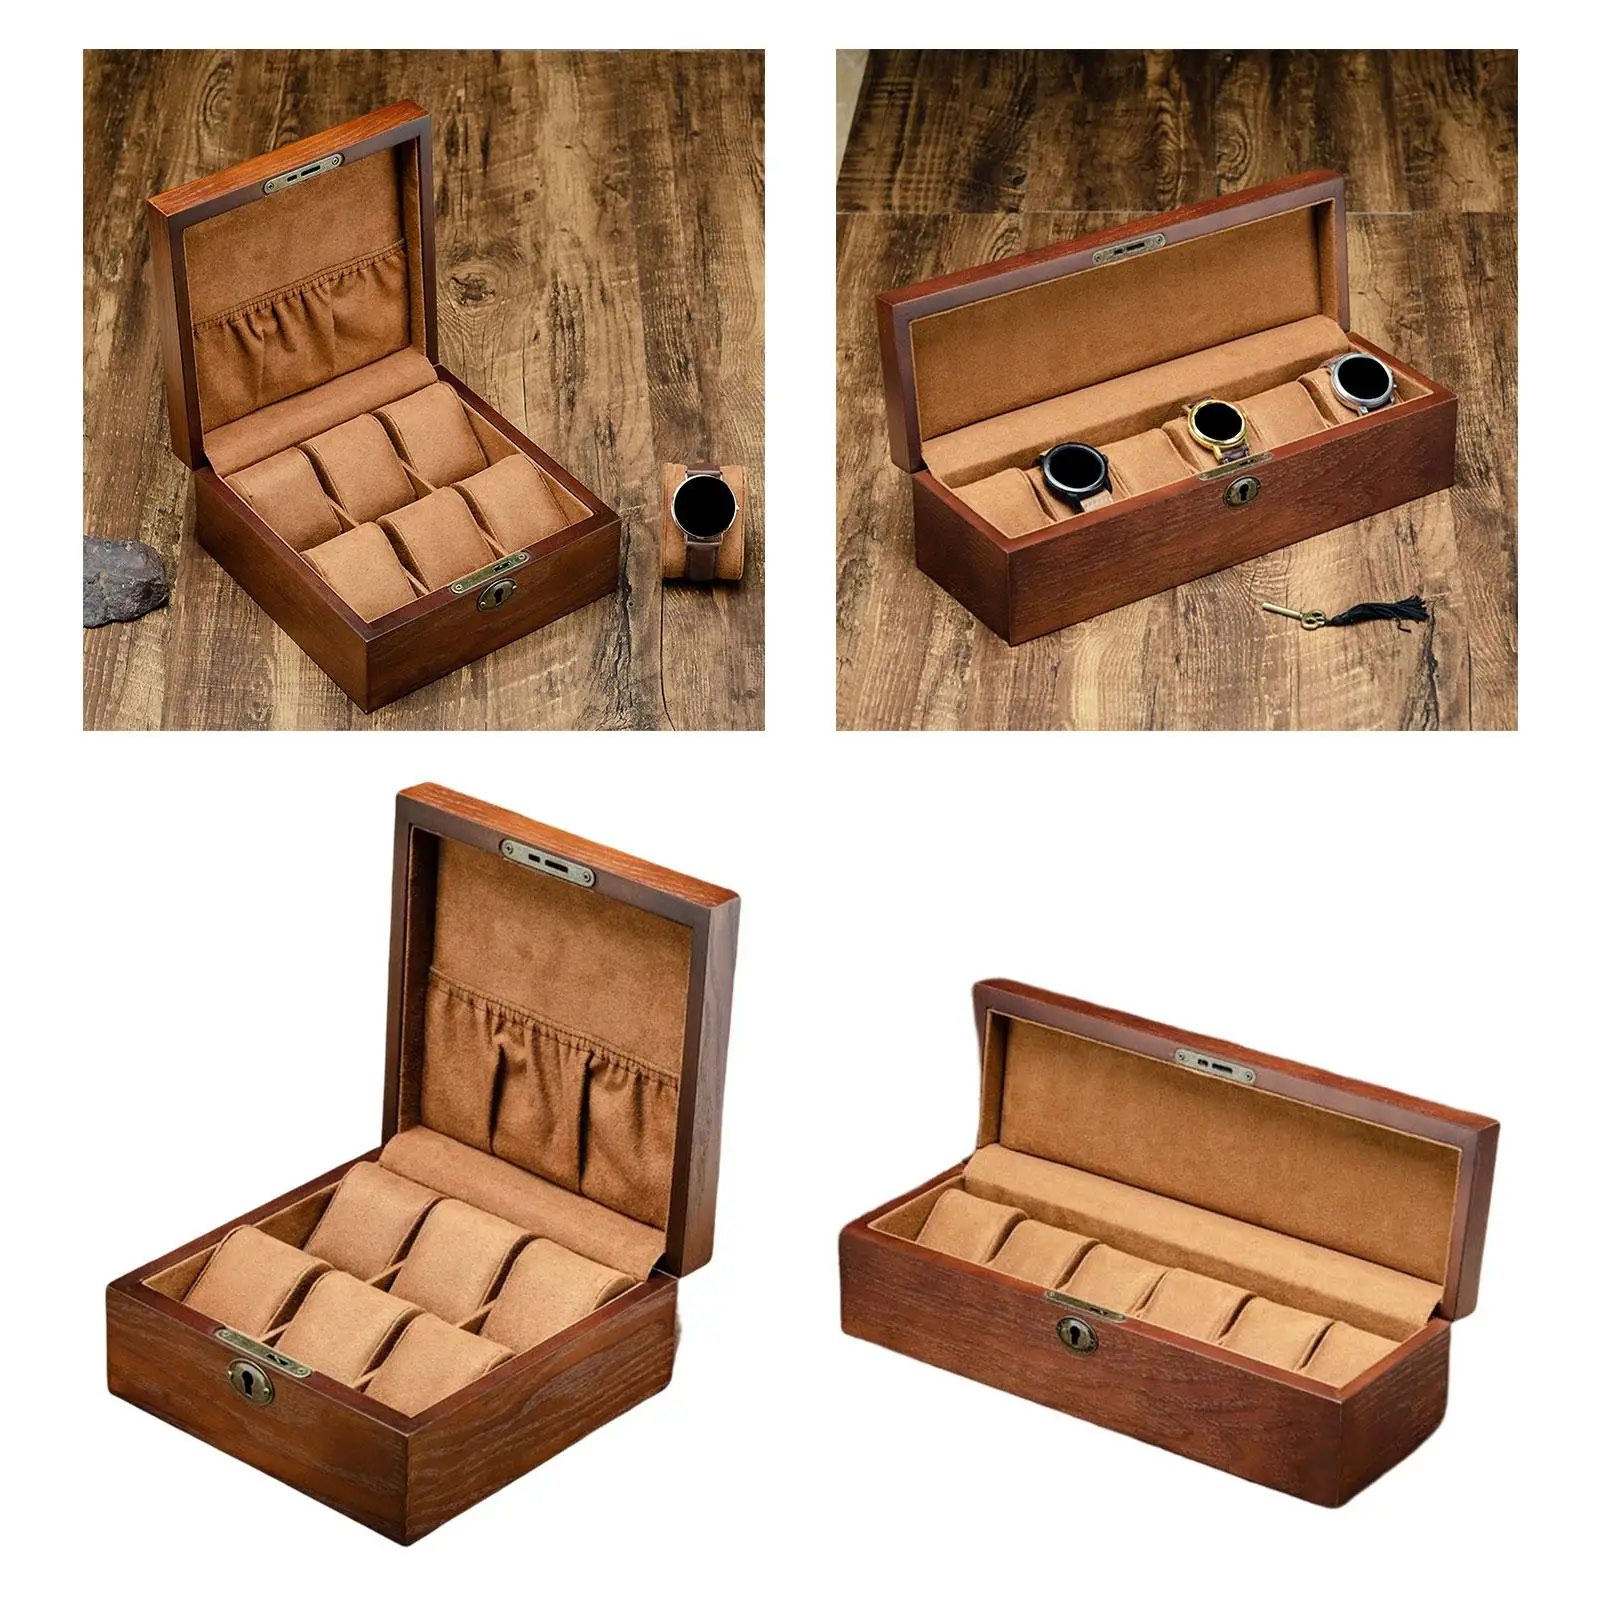 6 Slot Wood Watch Box with Removable Watch Pillow Sturdy Hinges Lockable Watch Display case Holder Showcase Birthday Gift